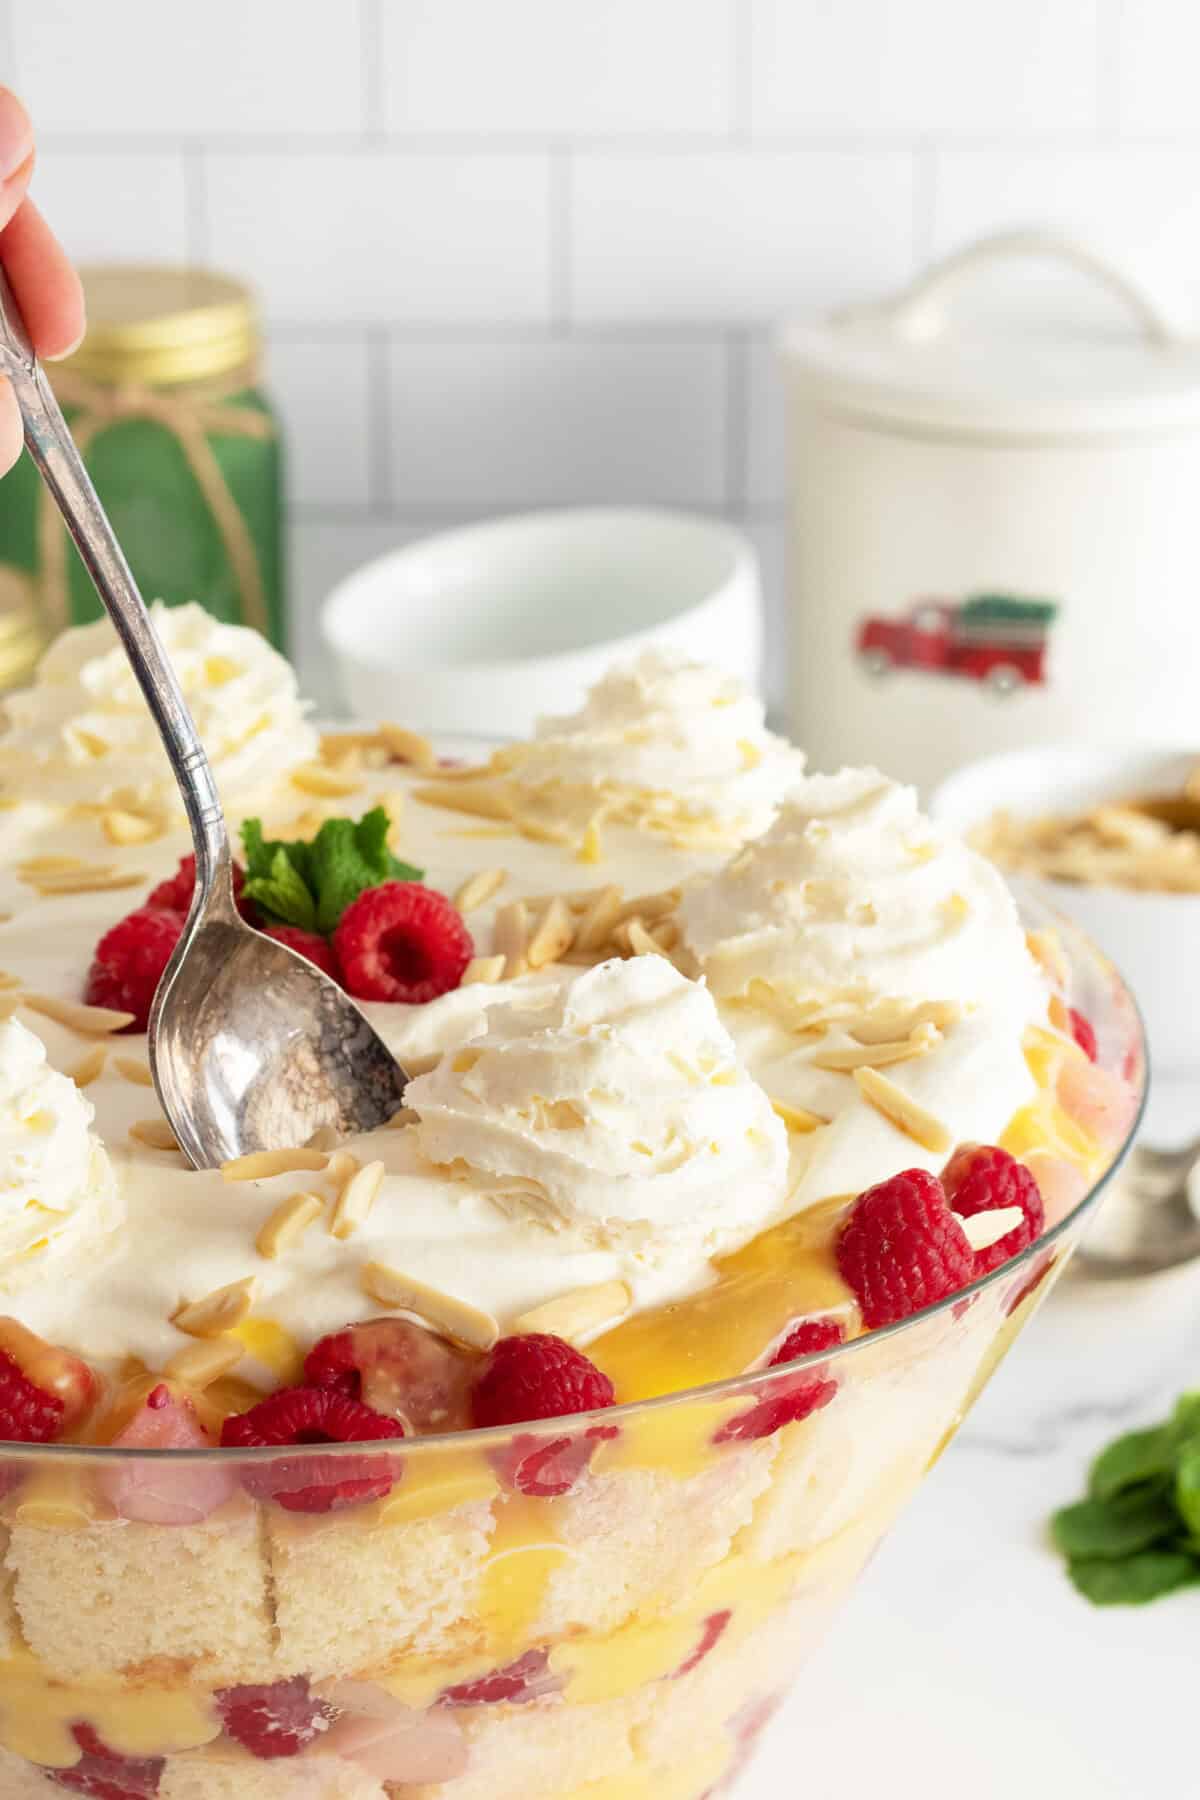 English Christmas Trifle with a spoon in the top of the trifle bowl